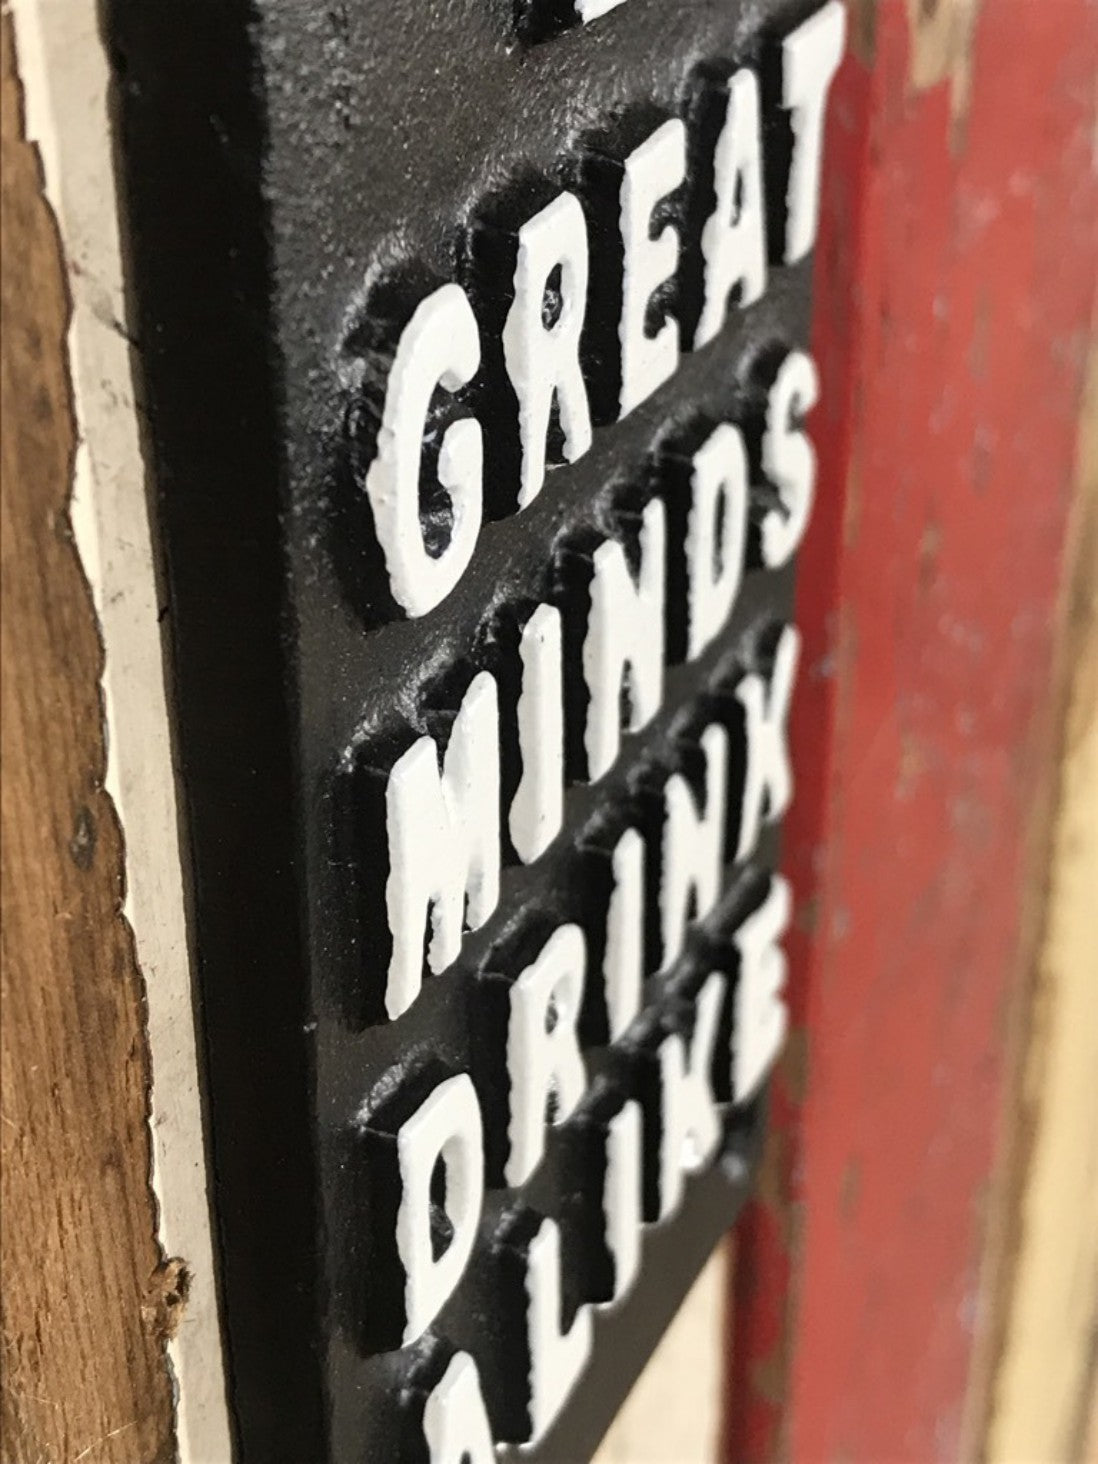 Wall Fixed Beer Bottle Opener “GREAT MINDS DRINK ALIKE” Cast Iron